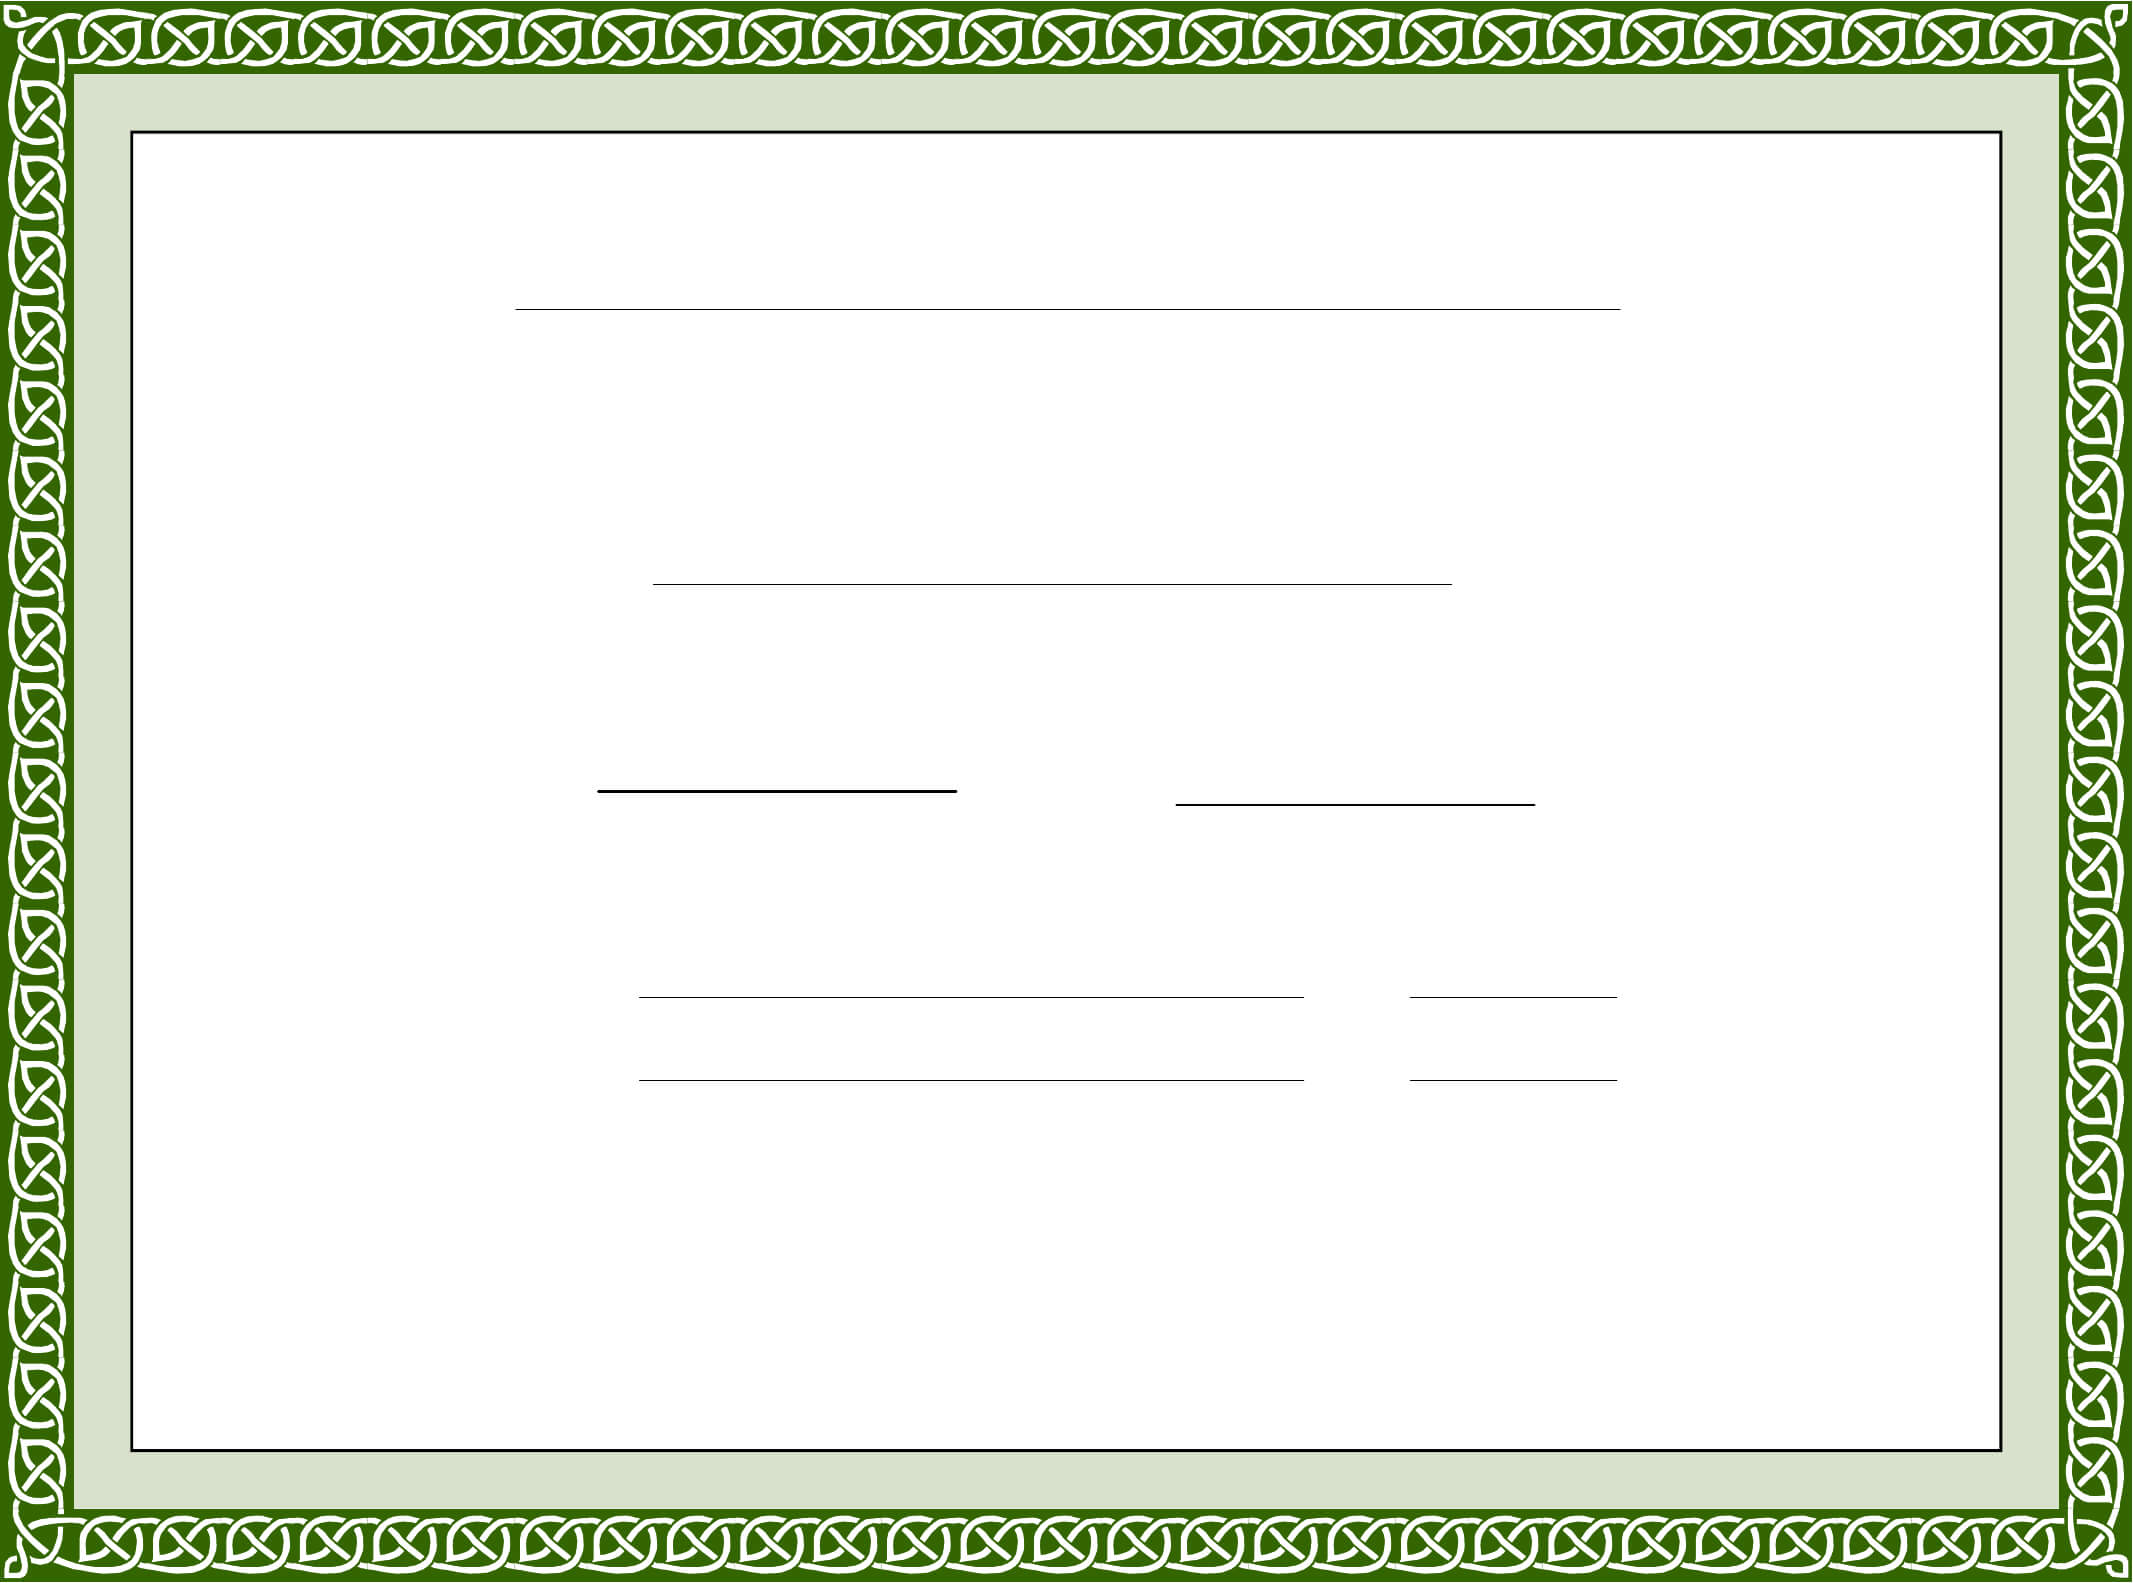 Sample Training Completion Certificate Template Free Download Throughout Free Training Completion Certificate Templates